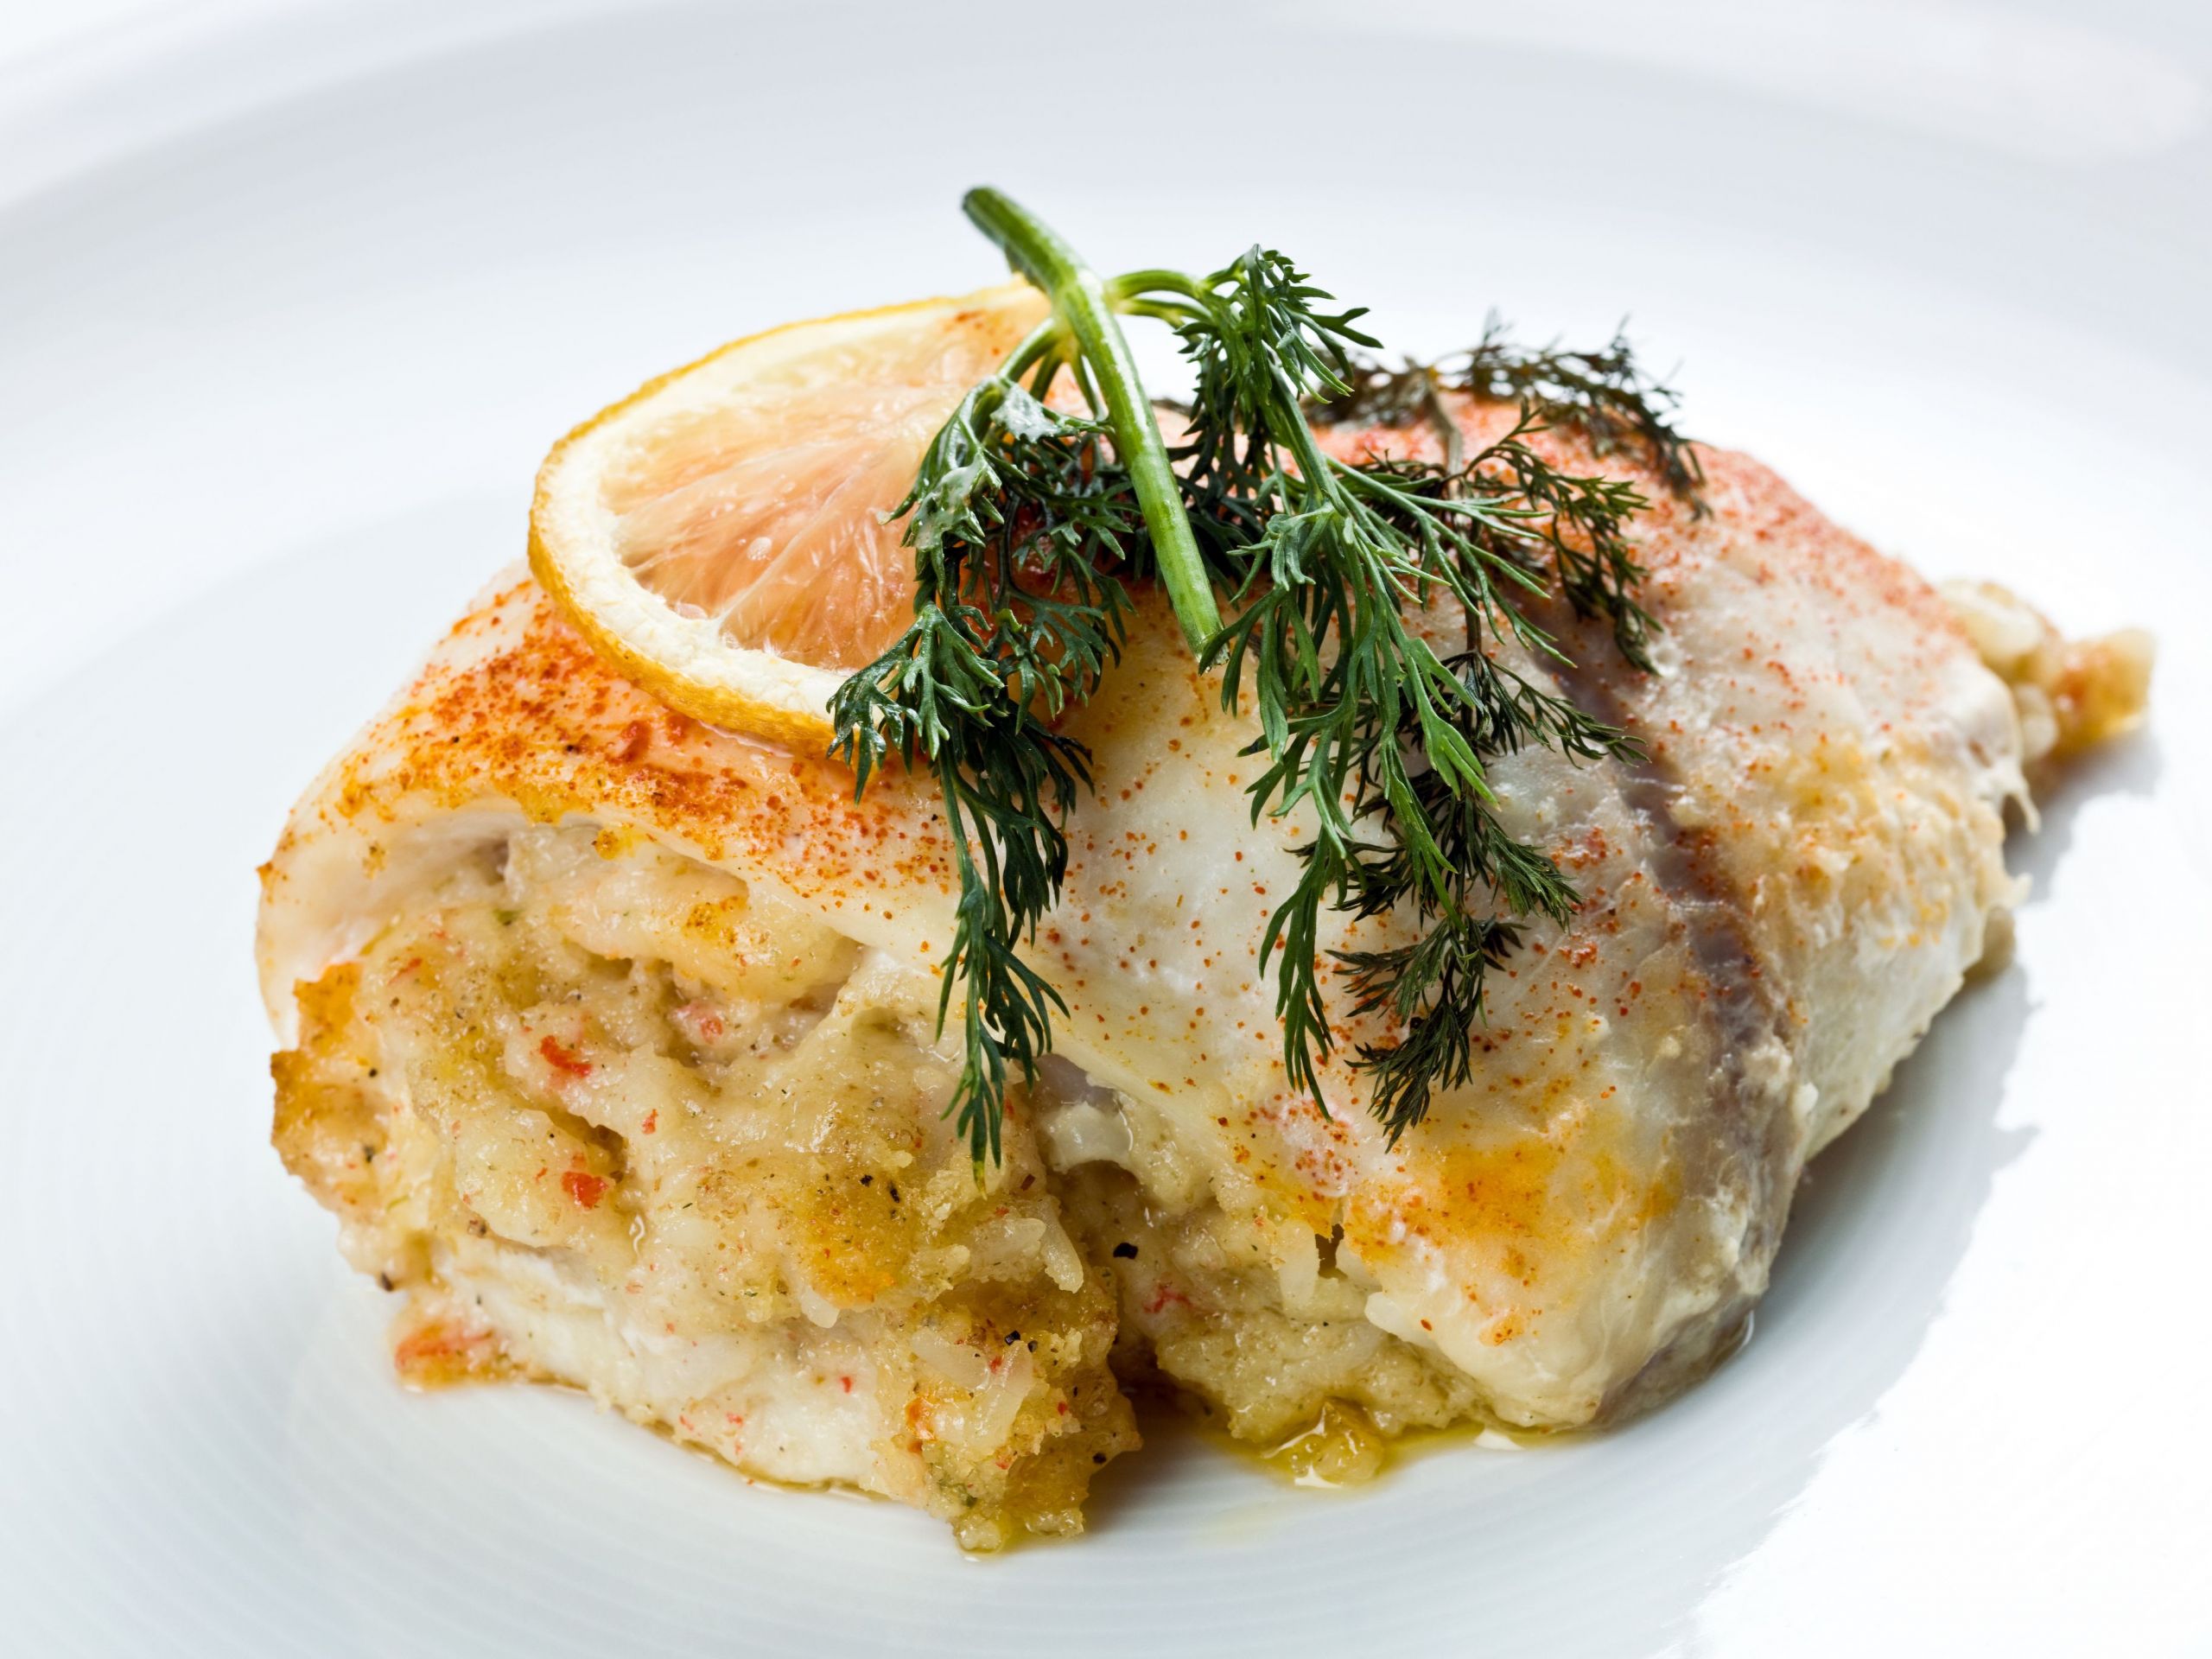 Baked Fish Fillet Recipes
 Baked Stuffed Fish Fillet Recipe With Breadcrumbs